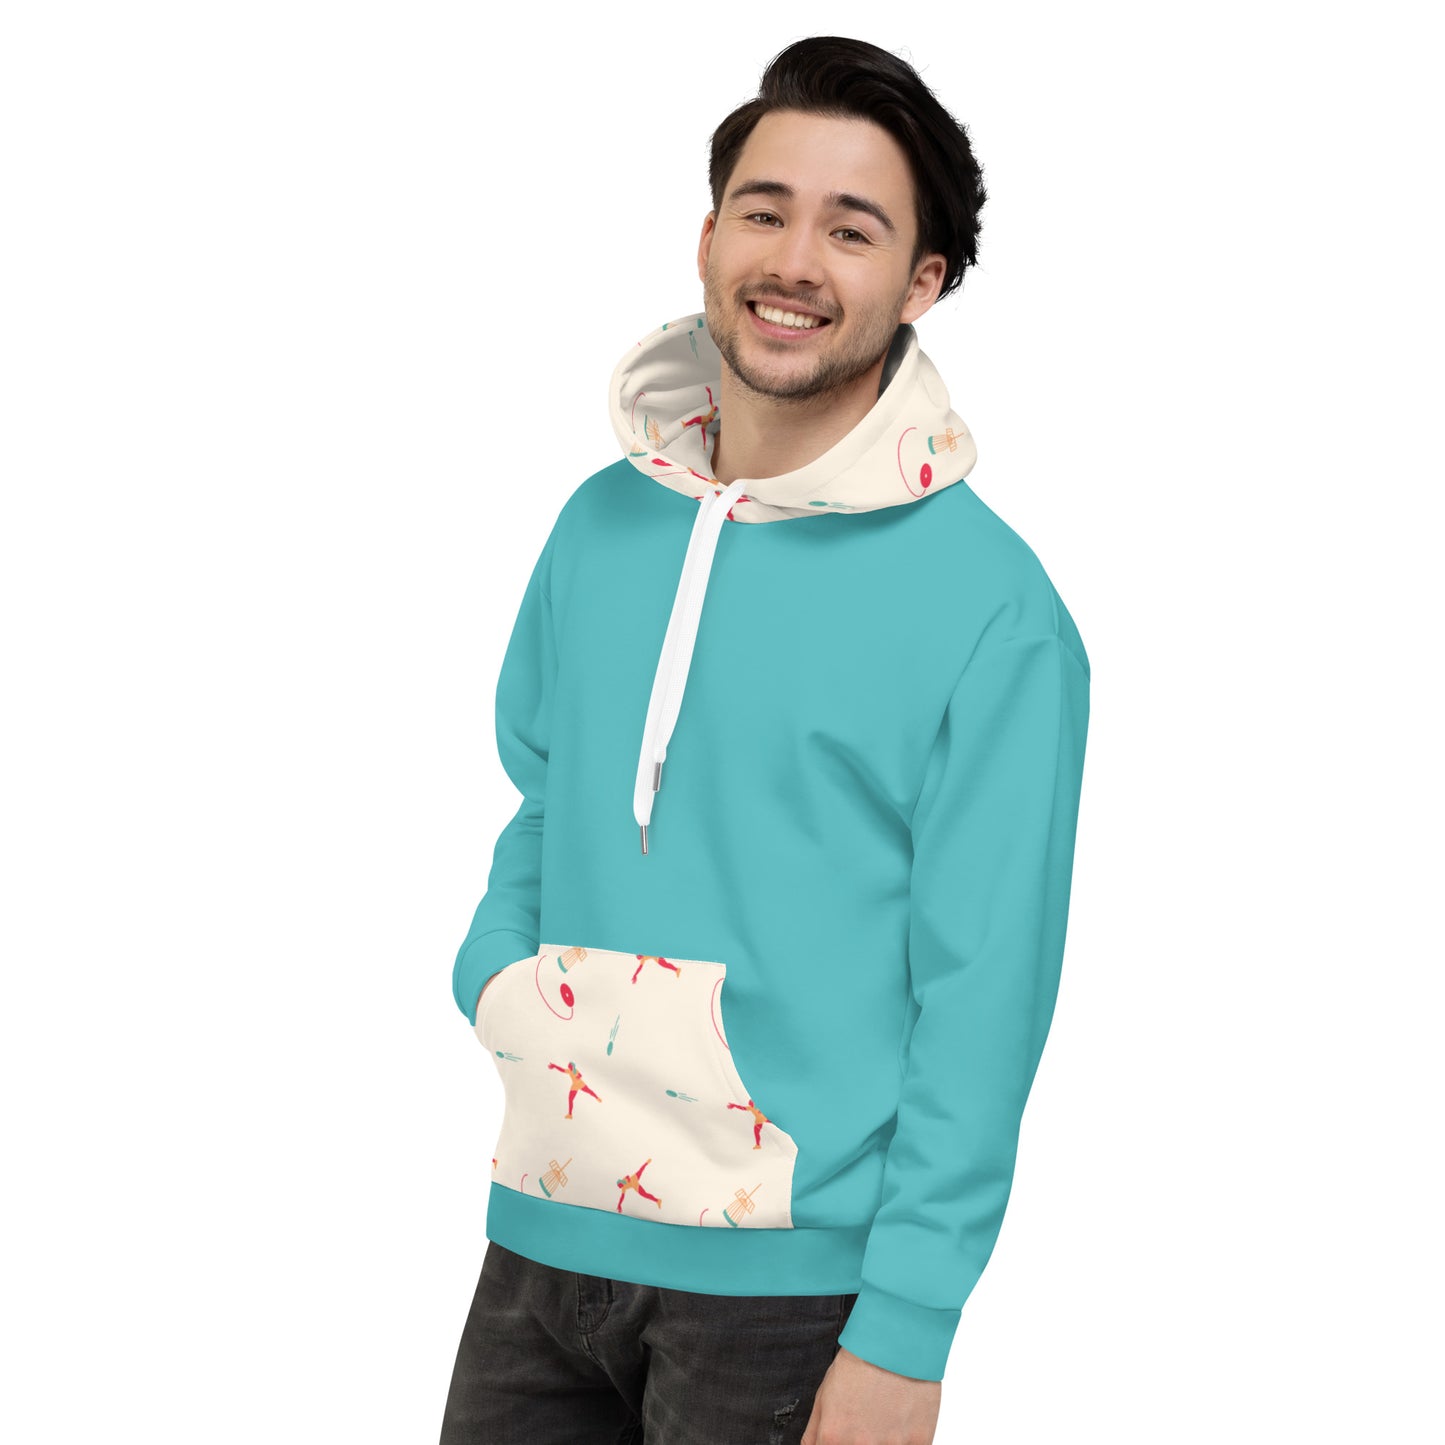 Ace in the Hole Disc Golf Colorblocked Hoodie